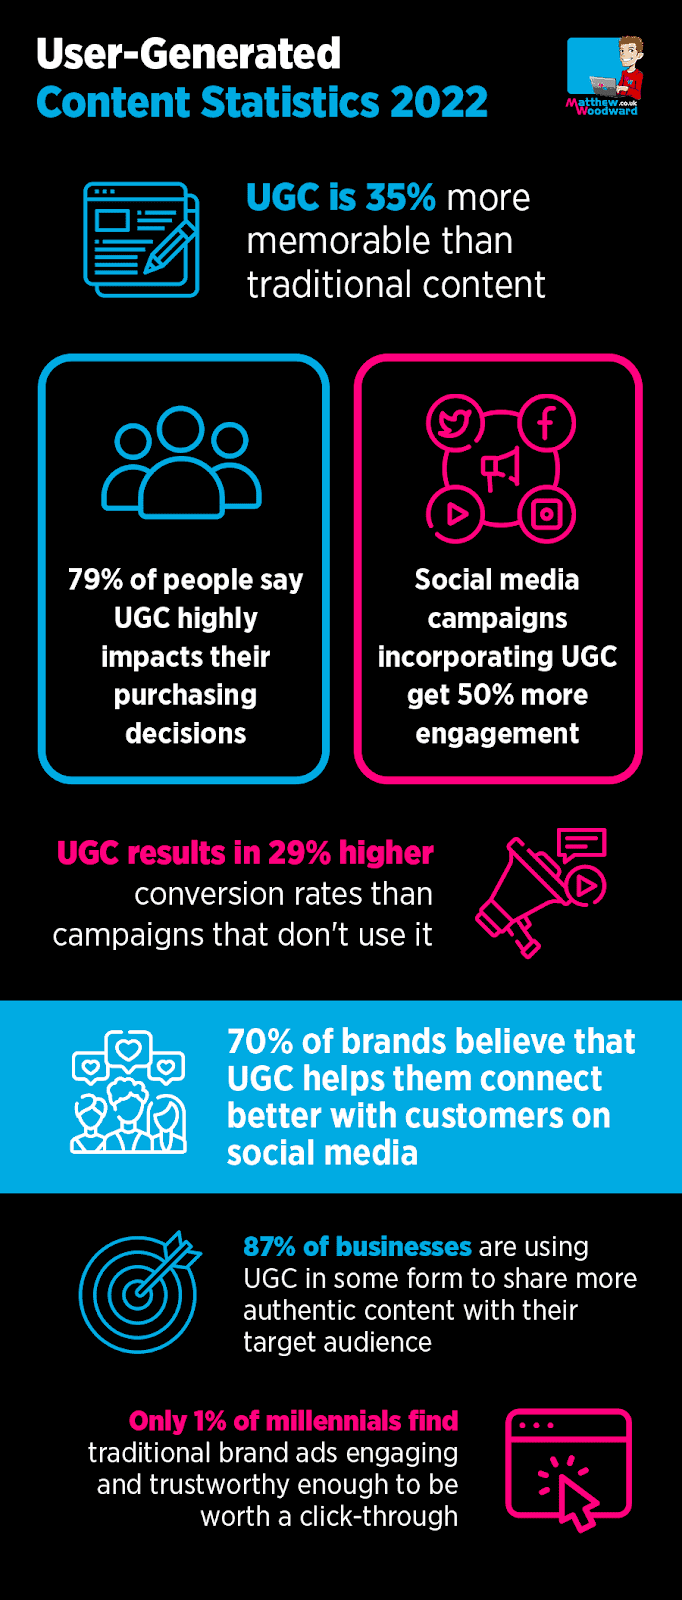 An infographic display a vast array of statistics about user-generated content. This includes that user generated content can increase conversion rates by 29%.